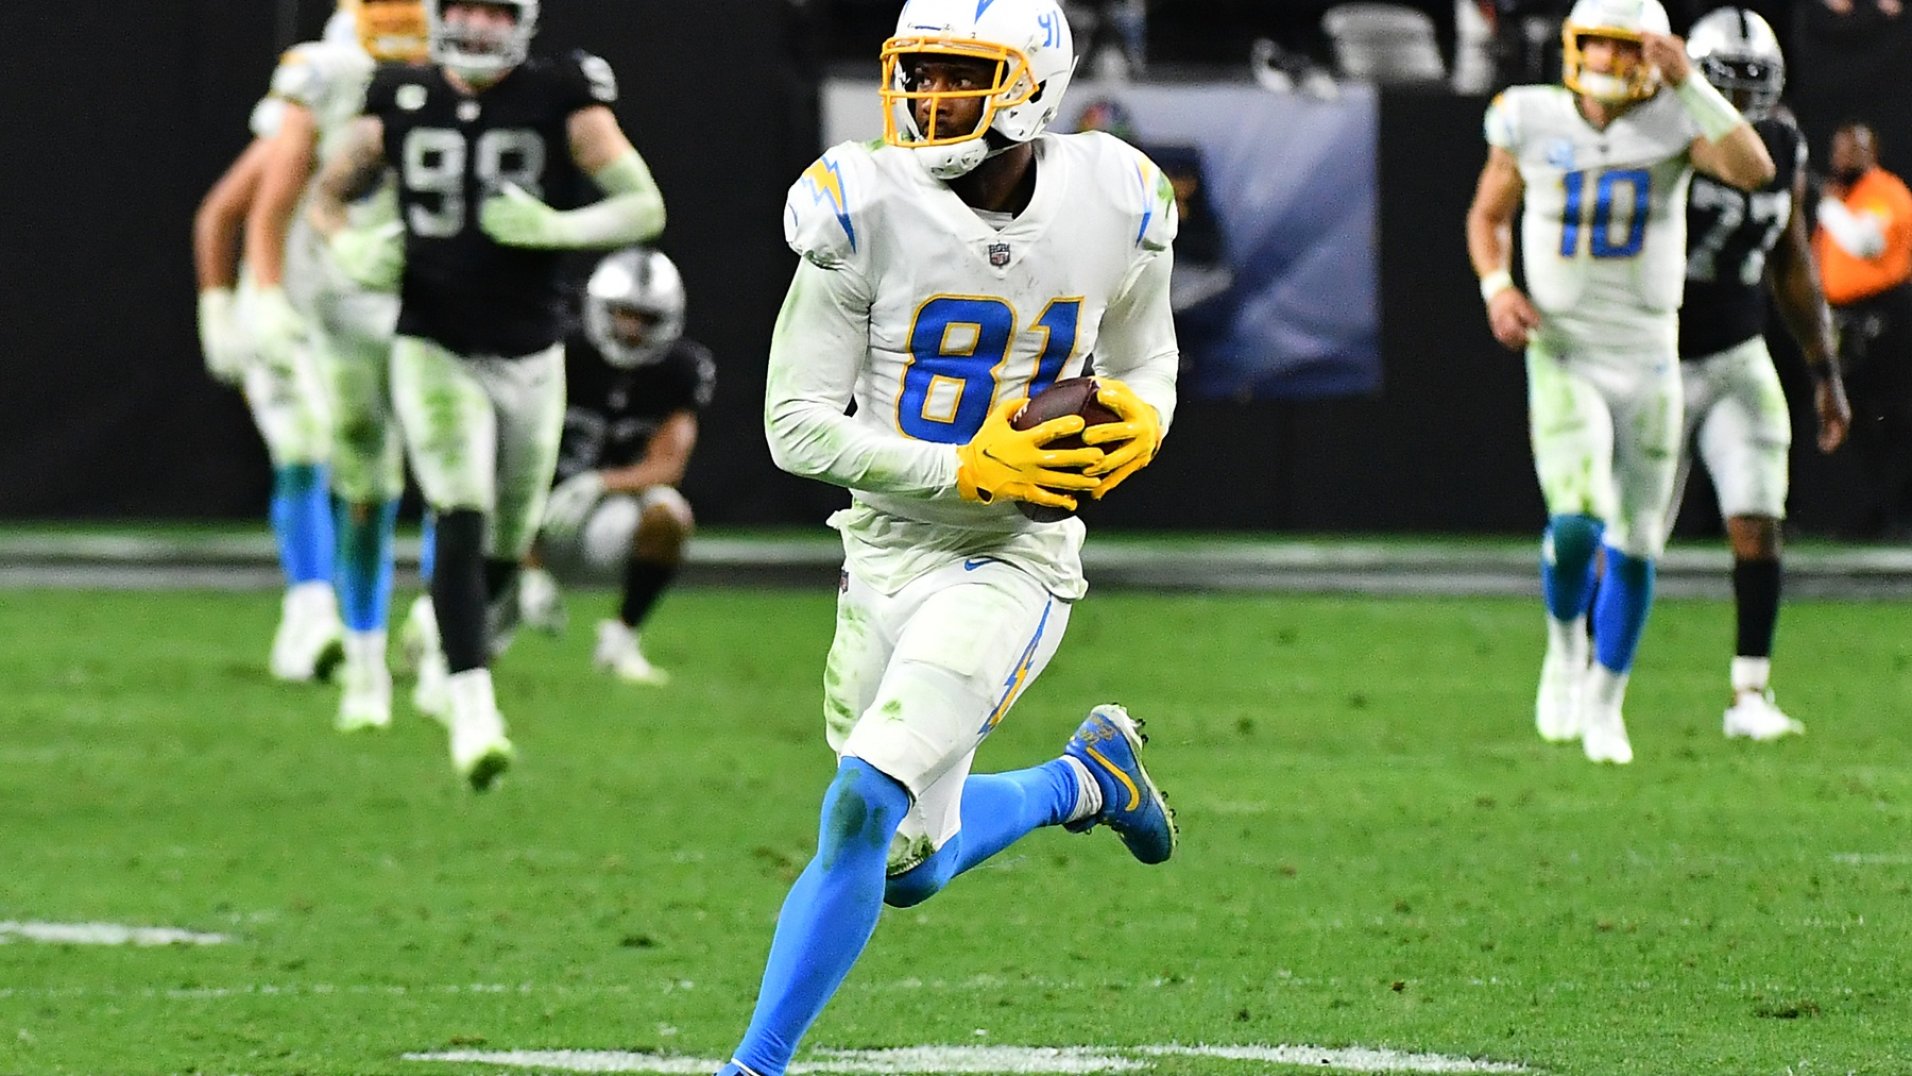 Best wide receivers available in the 2022 NFL Draft and free agency